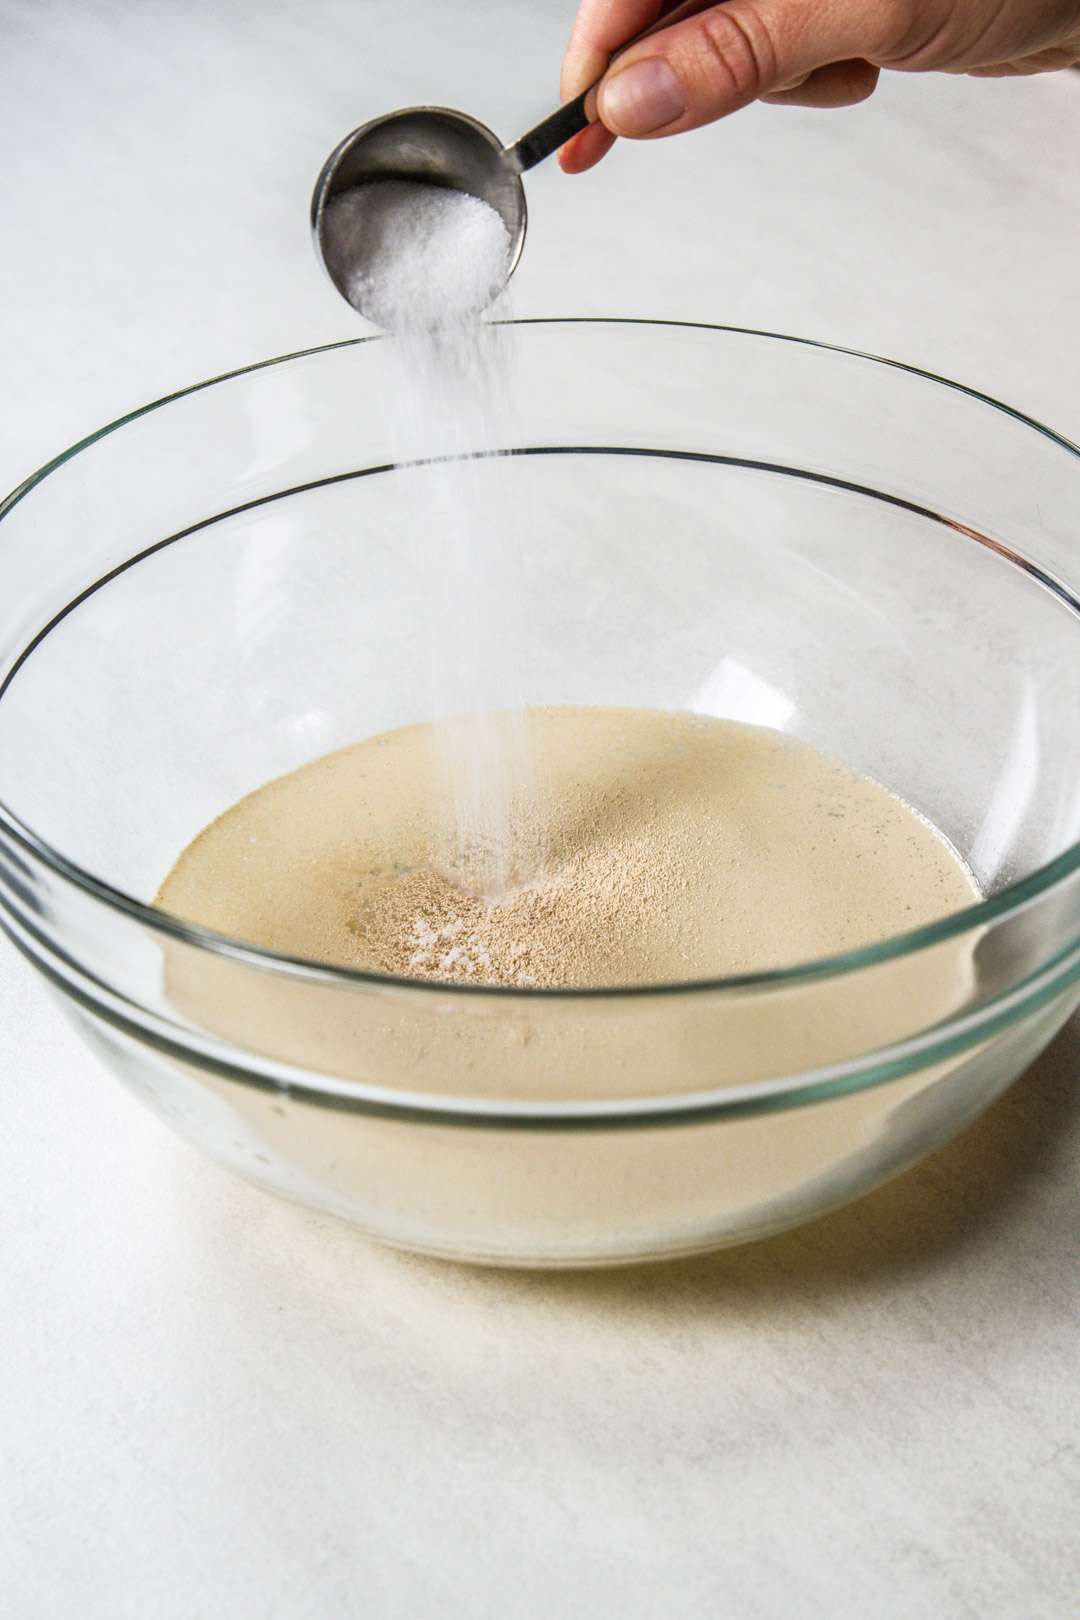 Pouring sugar into a bowl with yeast